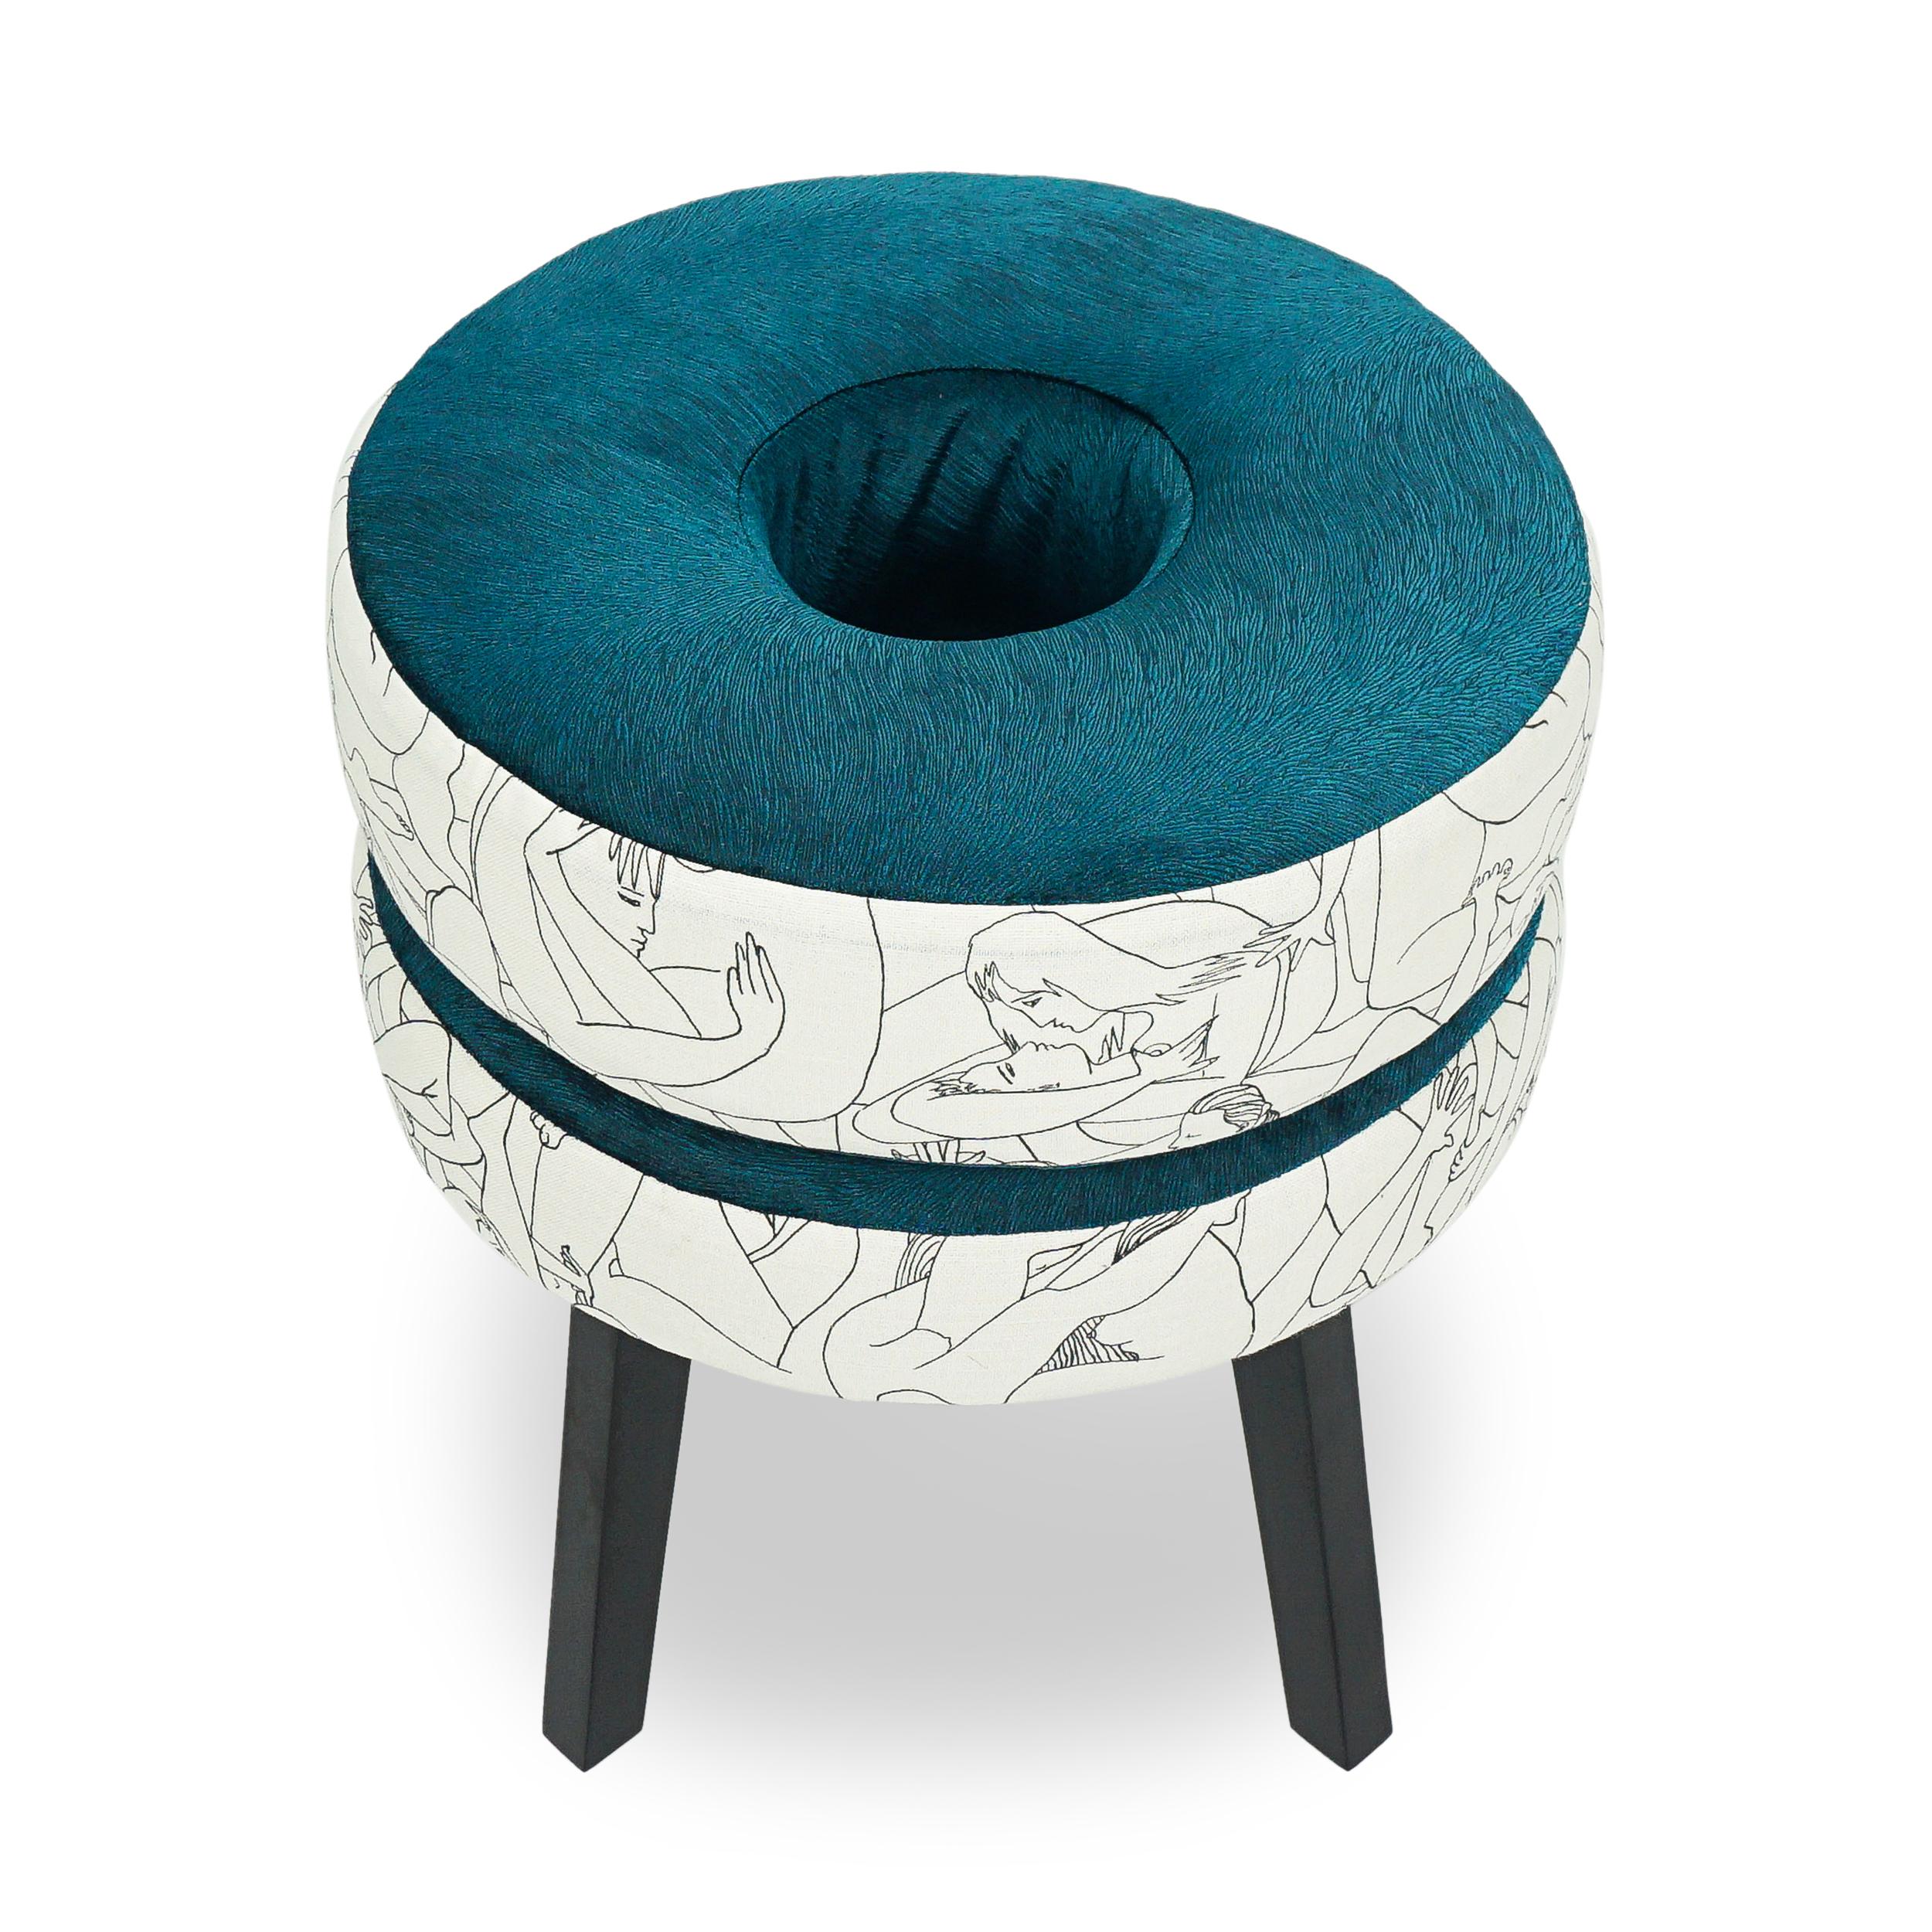 Donut shaped ottoman with black lacquered hard maple frame, performance teal feathered velvet seat and Pierre Frey naughty orgy printed linen. A bold statement of sex positivity.

Measurements:
Overall: 16”Dia. x 18”H

Price As Shown: $1,820